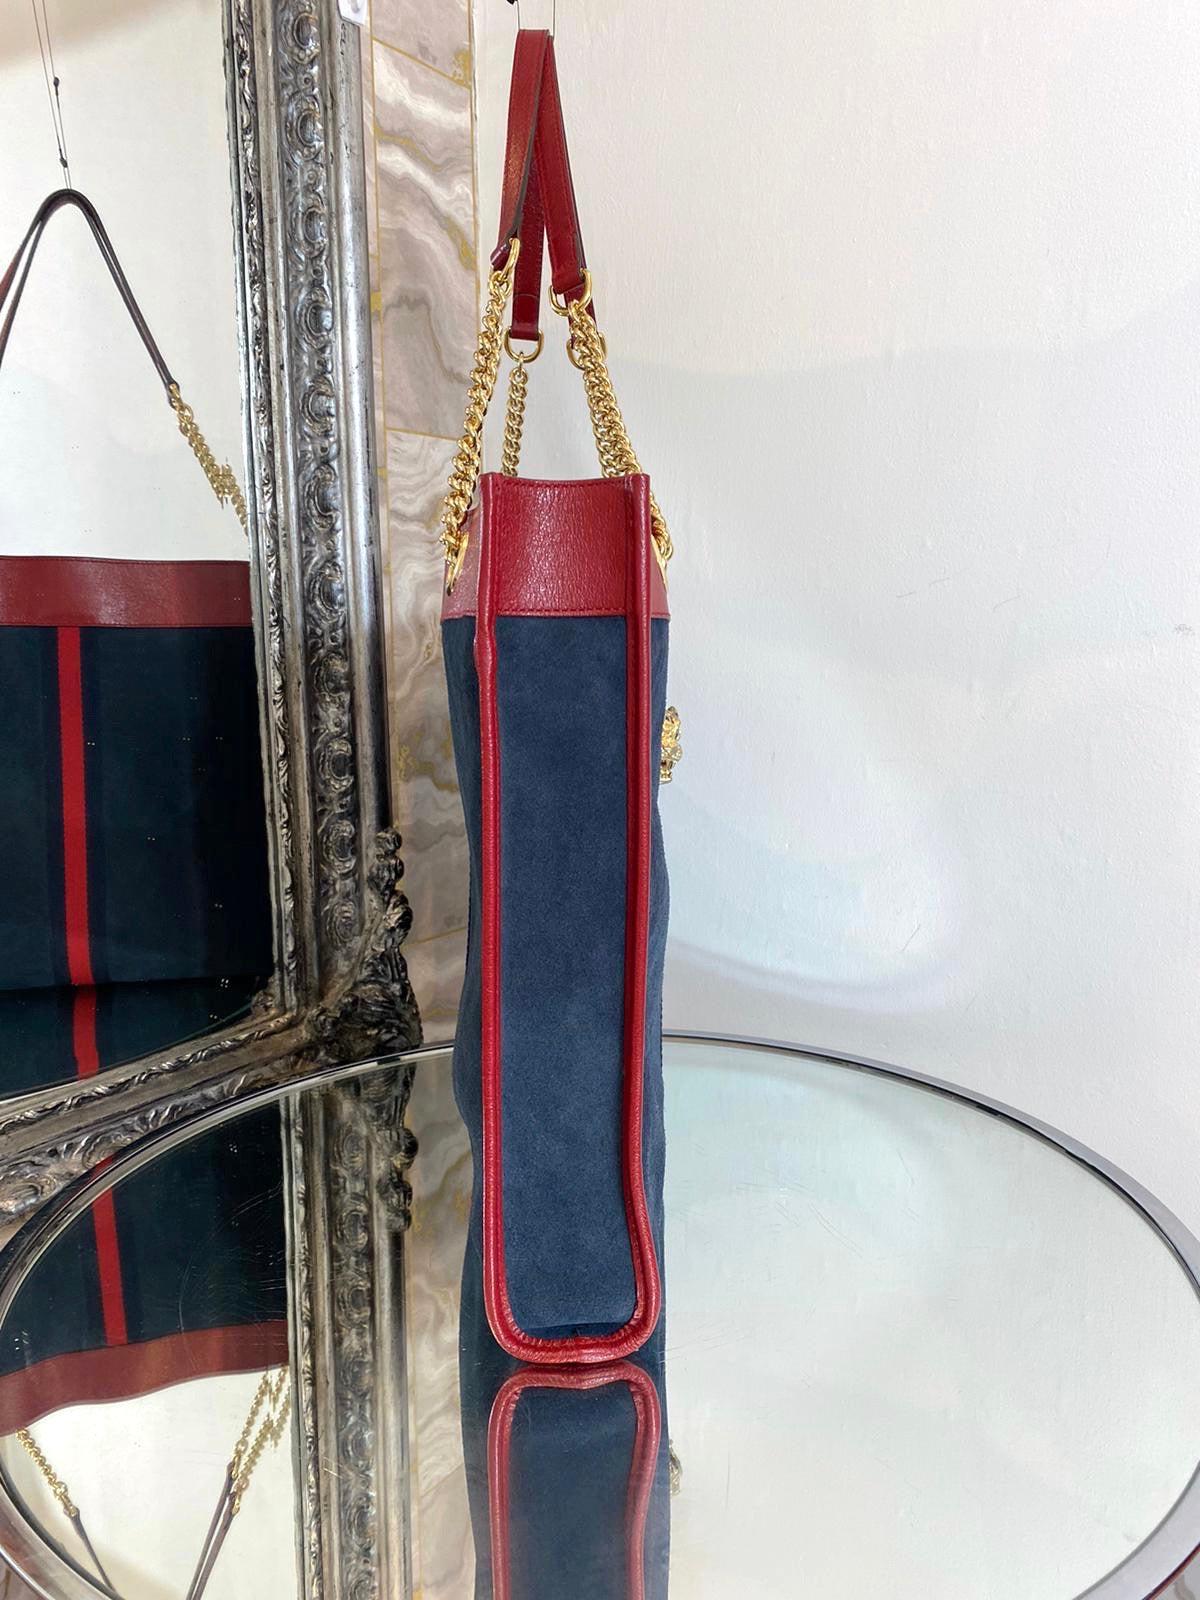 Gucci Suede Rajah Large Shopper Bag In Excellent Condition For Sale In London, GB